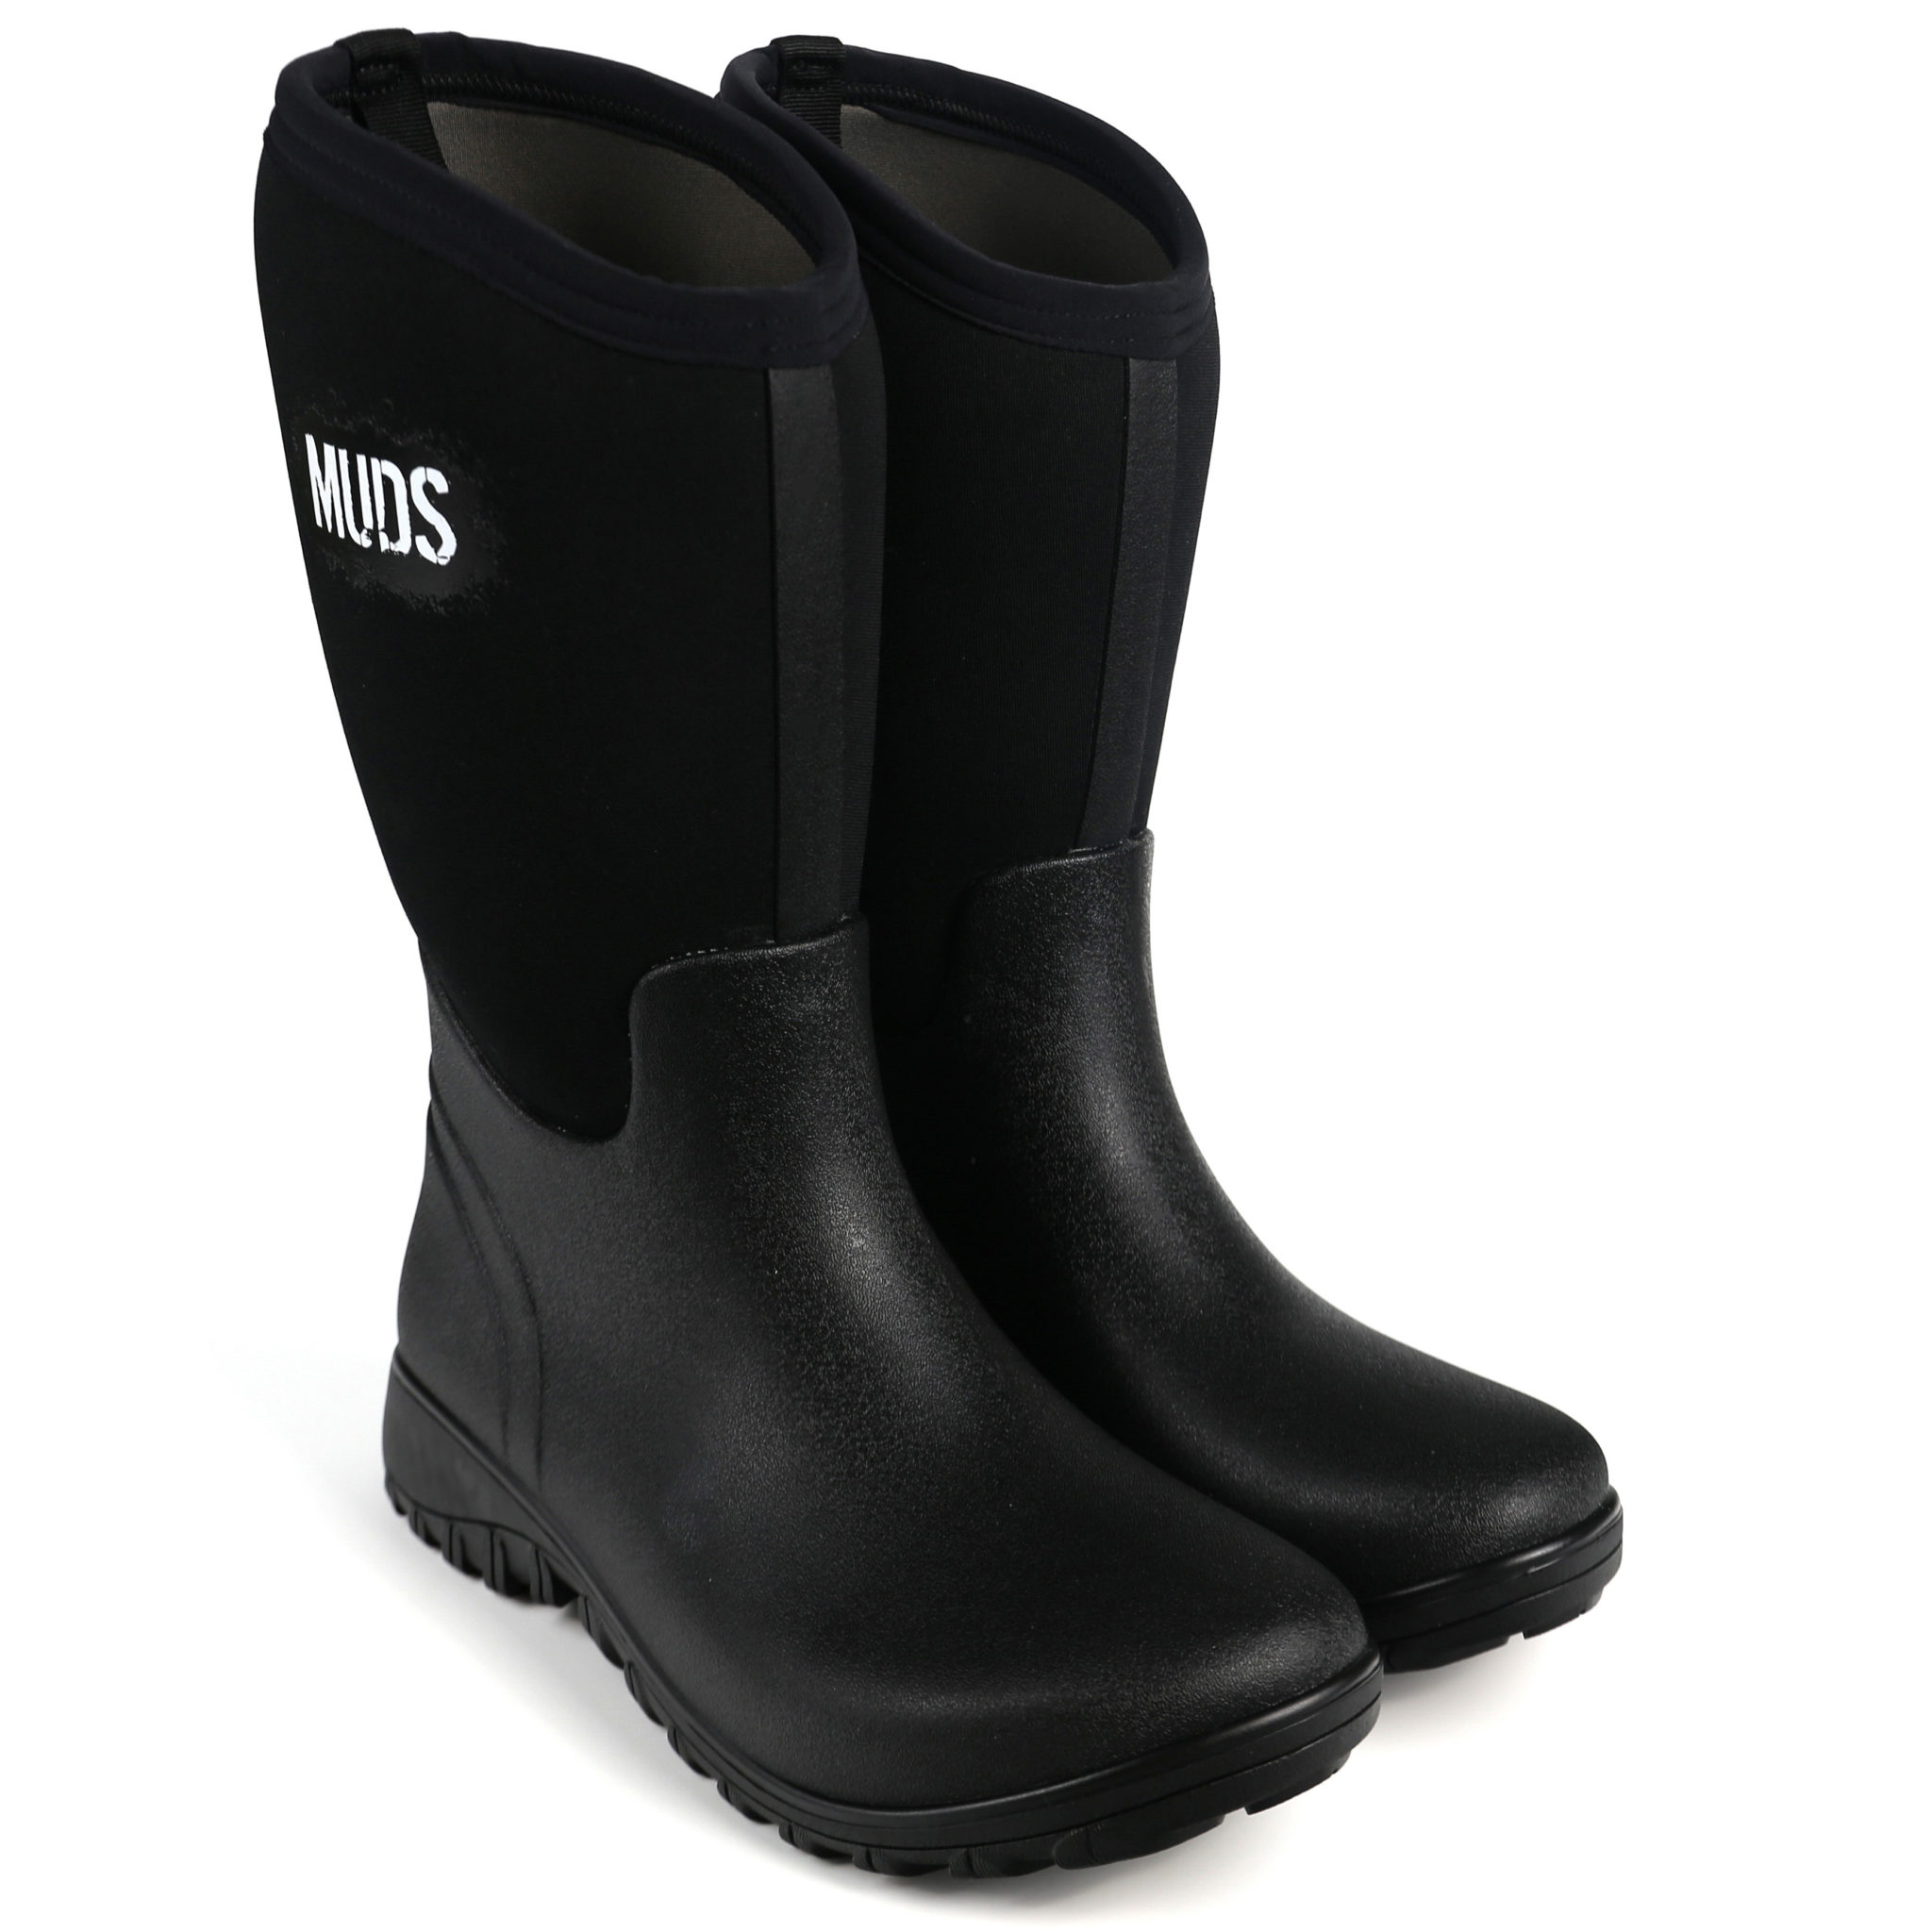 Muds Tall, Ladies Full Welly in Green | Wellies.com